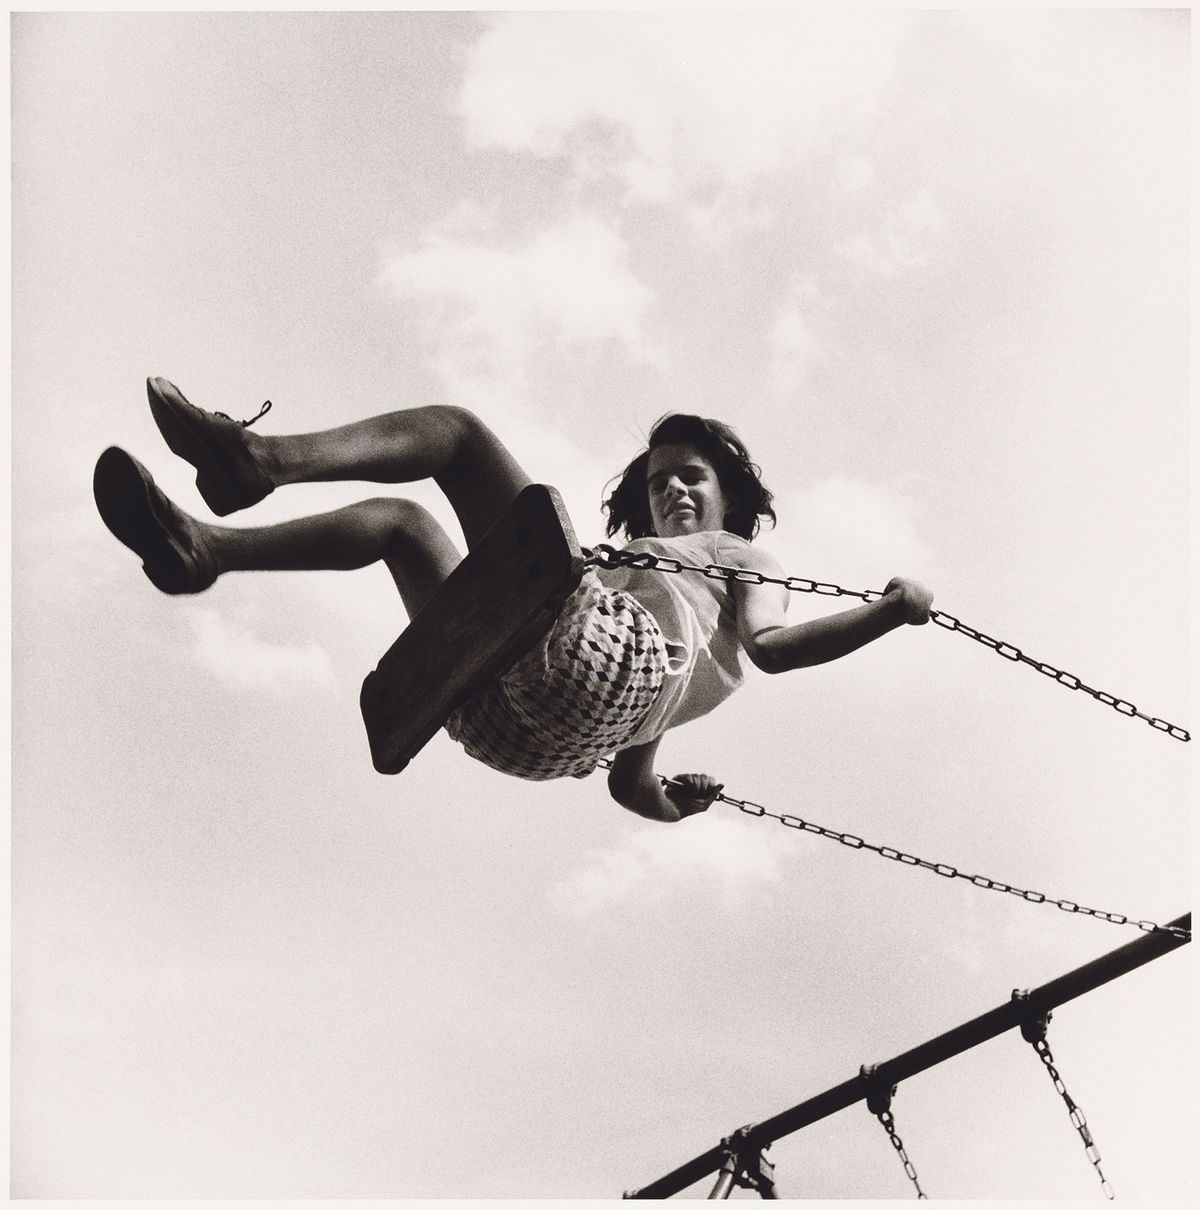 Different direction: the Ukrainian Museum’s show concentrates on Peter Hujar’s work up to 1969 and features images the artist created depicting children with disabilities, including Girl on Swing, Southbury (1957) Courtesy of The Ukrainian Museum, New York; © The Peter Hujar Archive—Artists Rights Society (ARS), NY